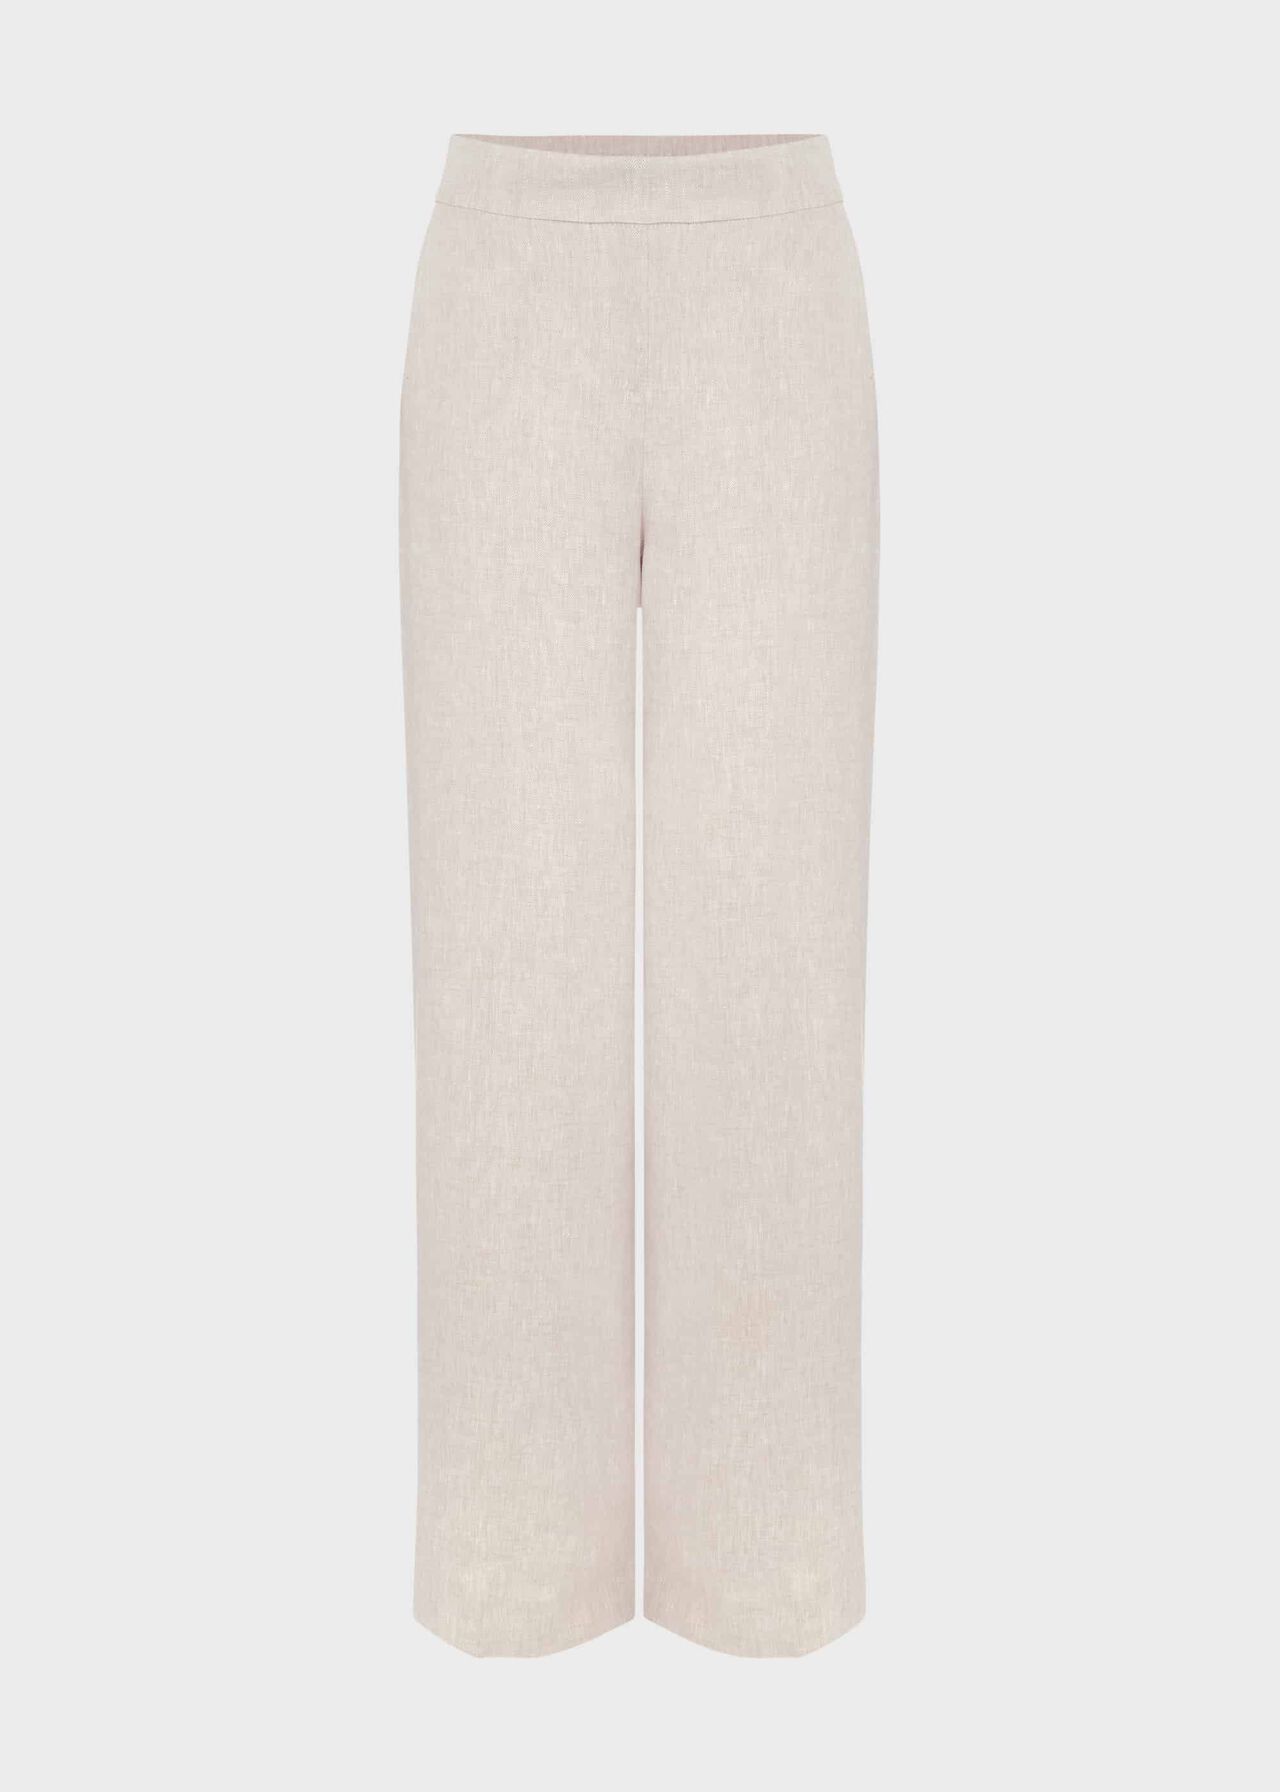 Maeve Linen Pants With Stretch, Neutral, hi-res